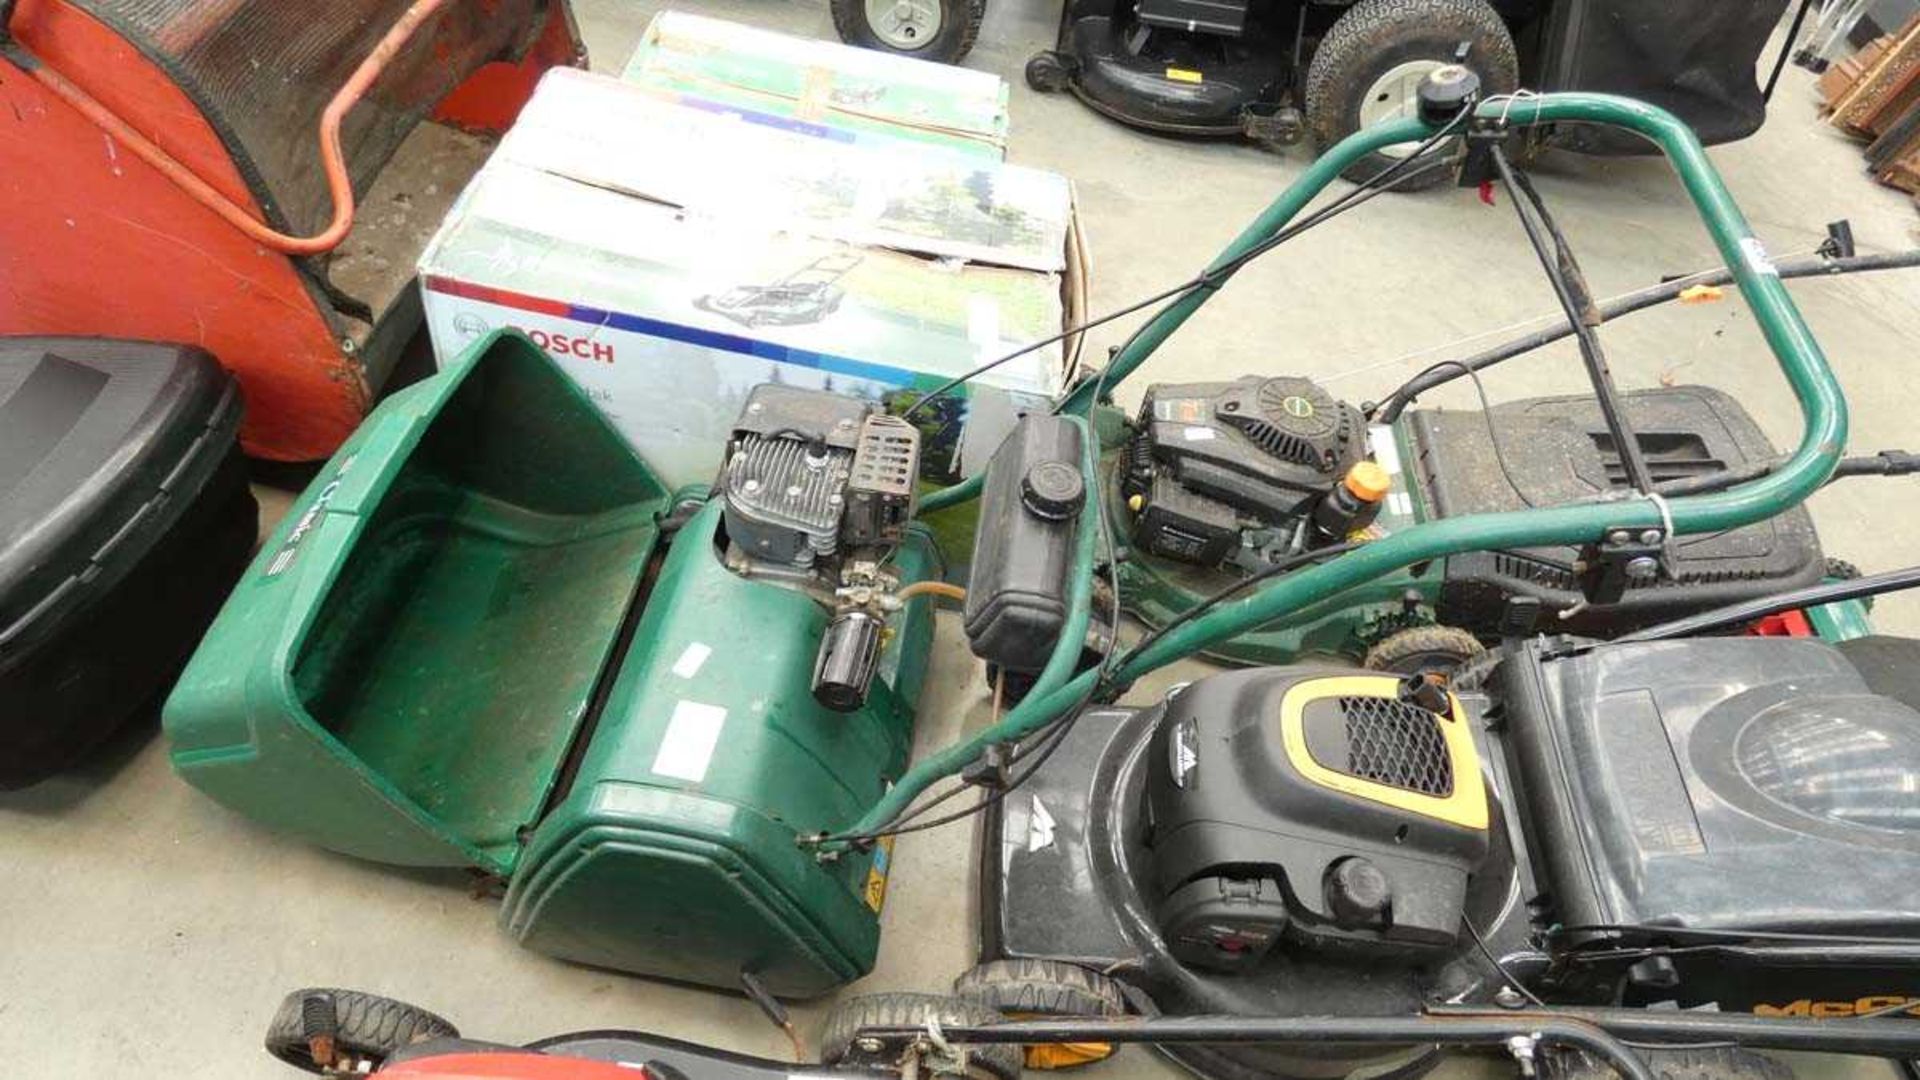 Petrol powered classic cylinder lawn mower with grass box